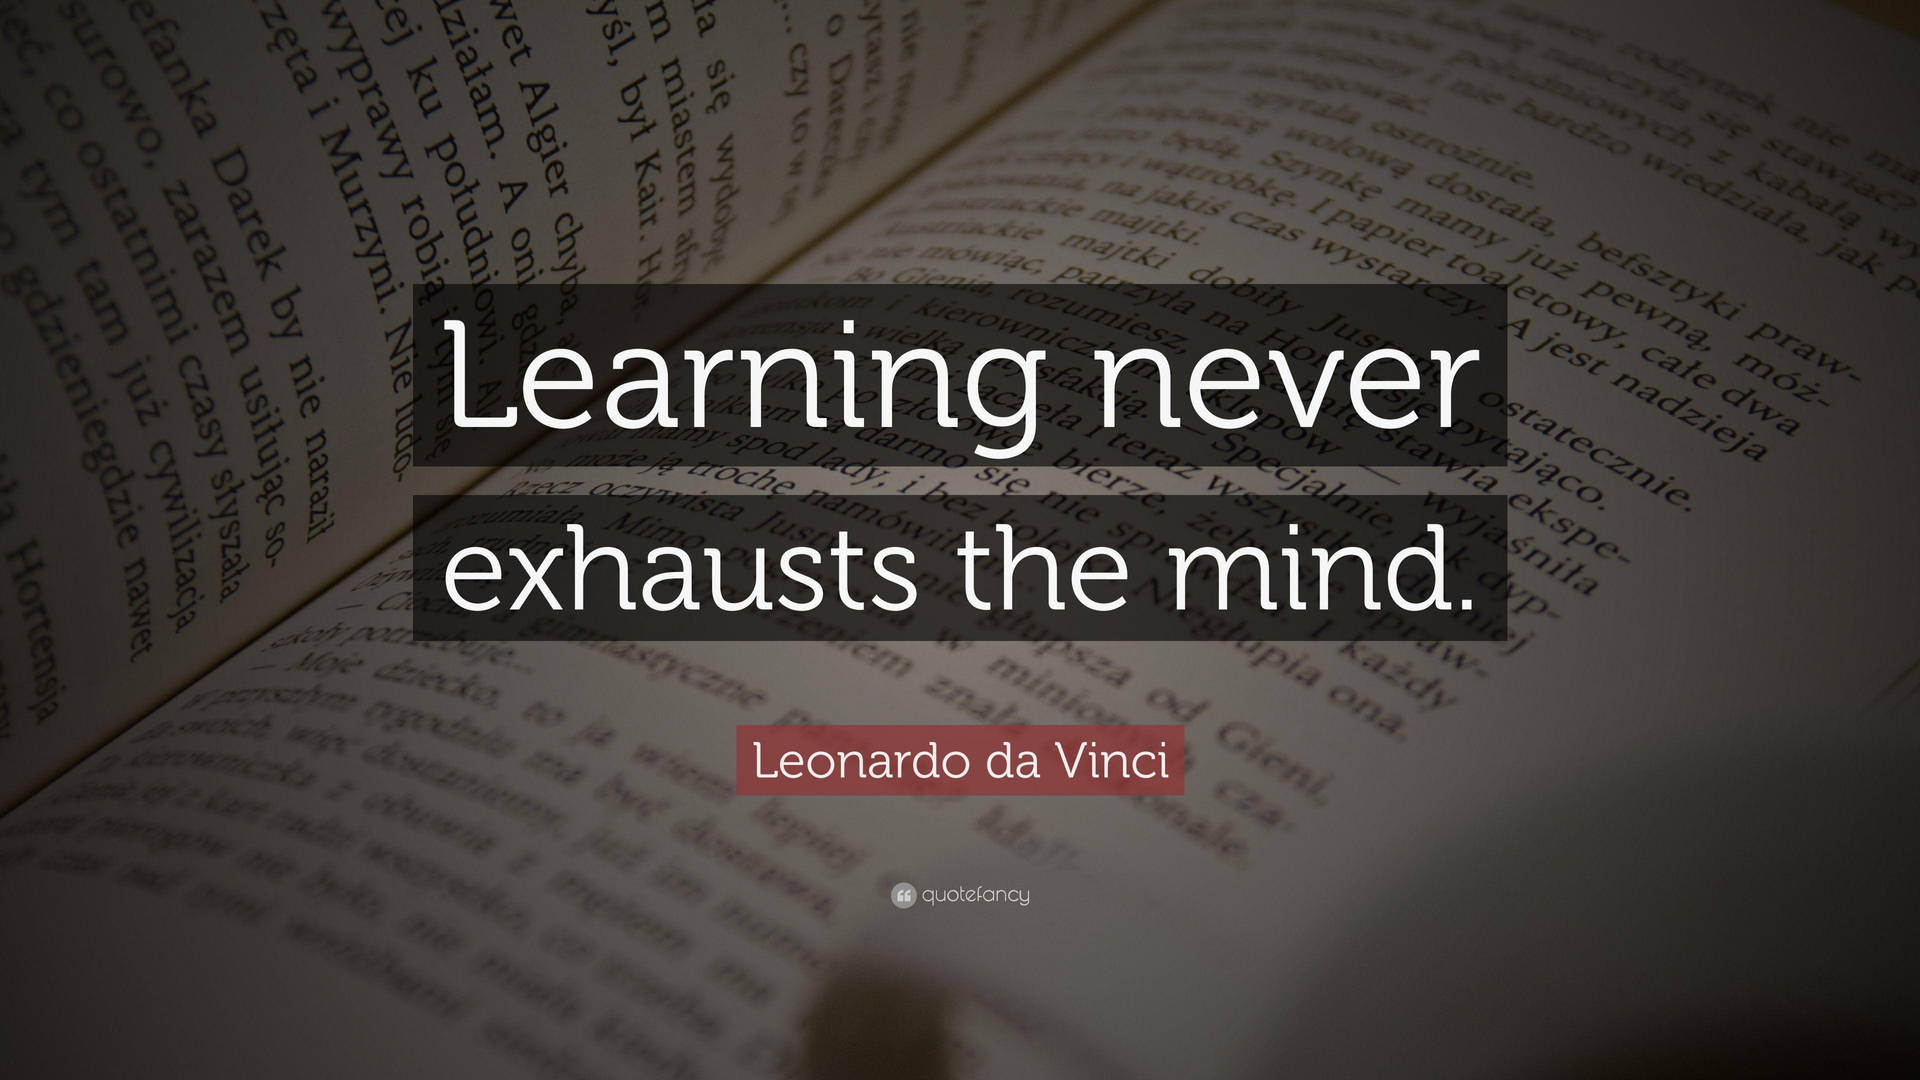 Learning Never Exhausts The Mind Text Wallpaper